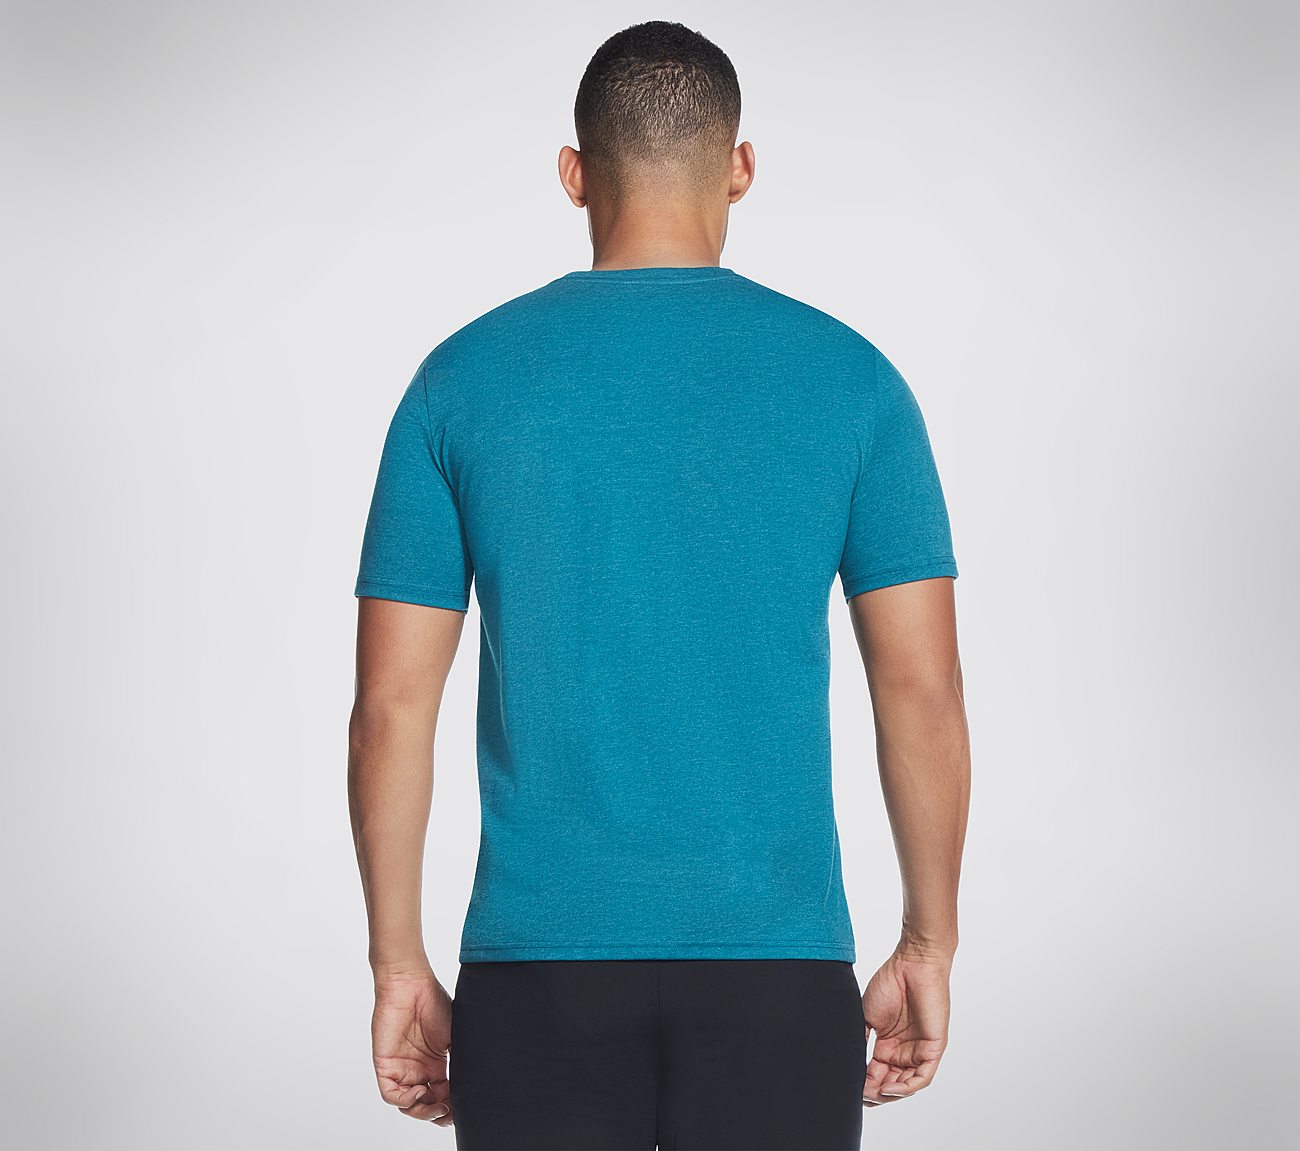 PAST TIME T-SHIRT, NAVY/TEAL Apparels Top View